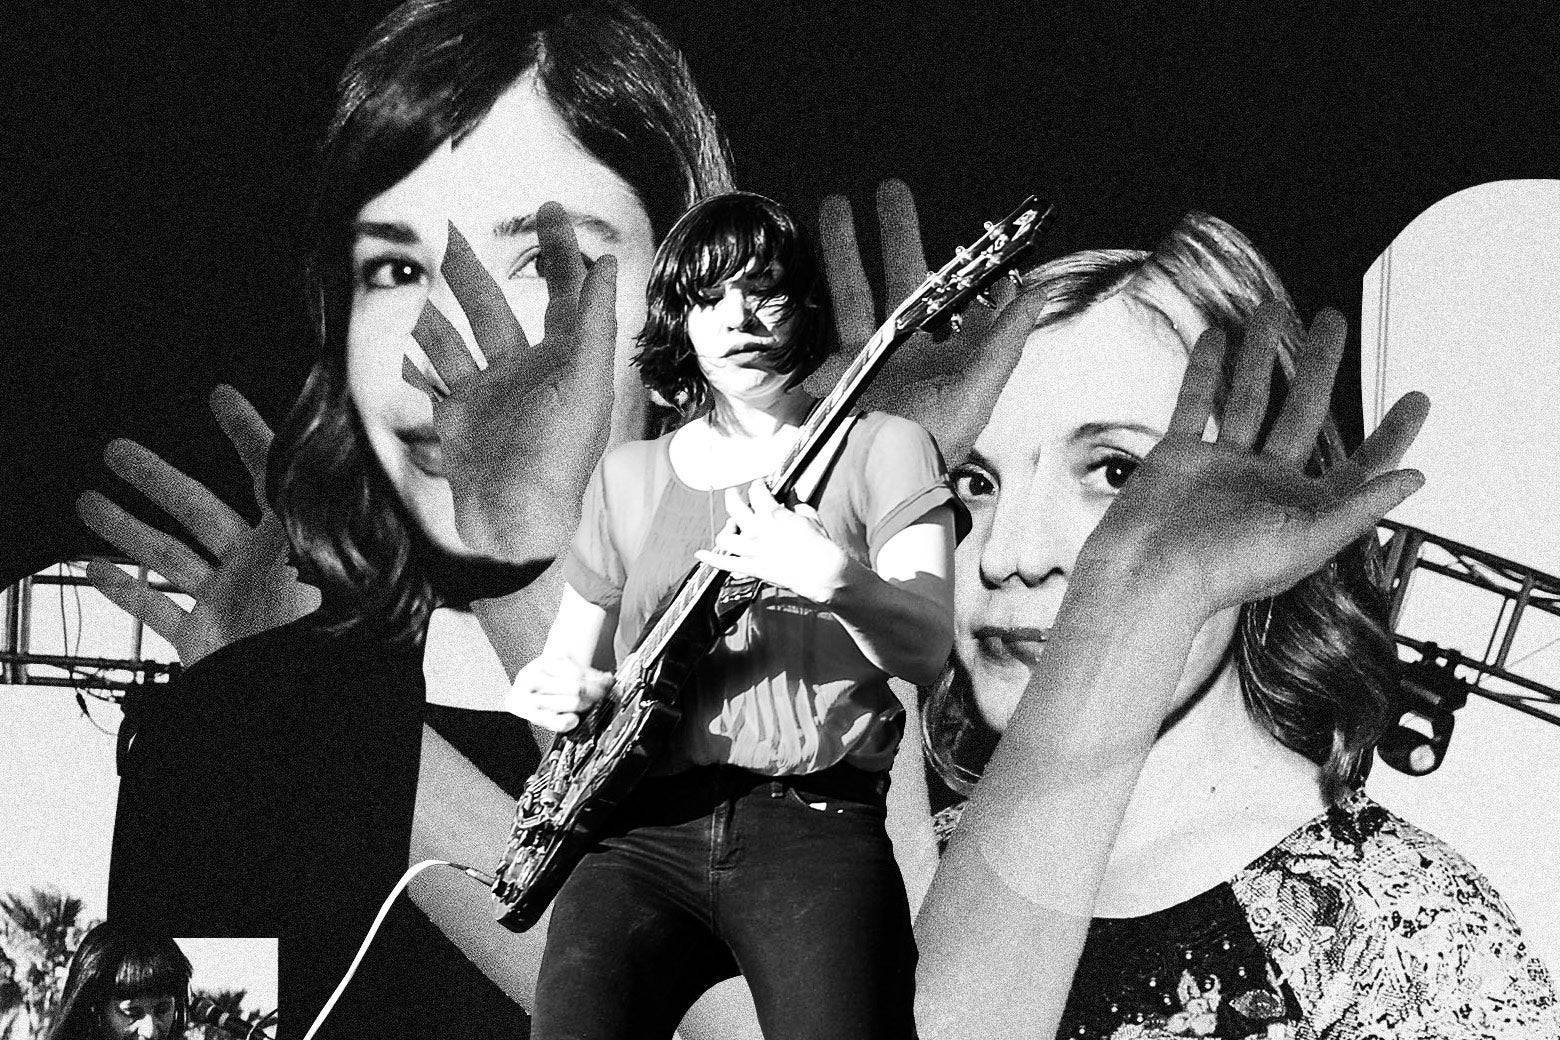 Collage featuring Carrie Brownstein and Corin Tucker of Sleater-Kinney